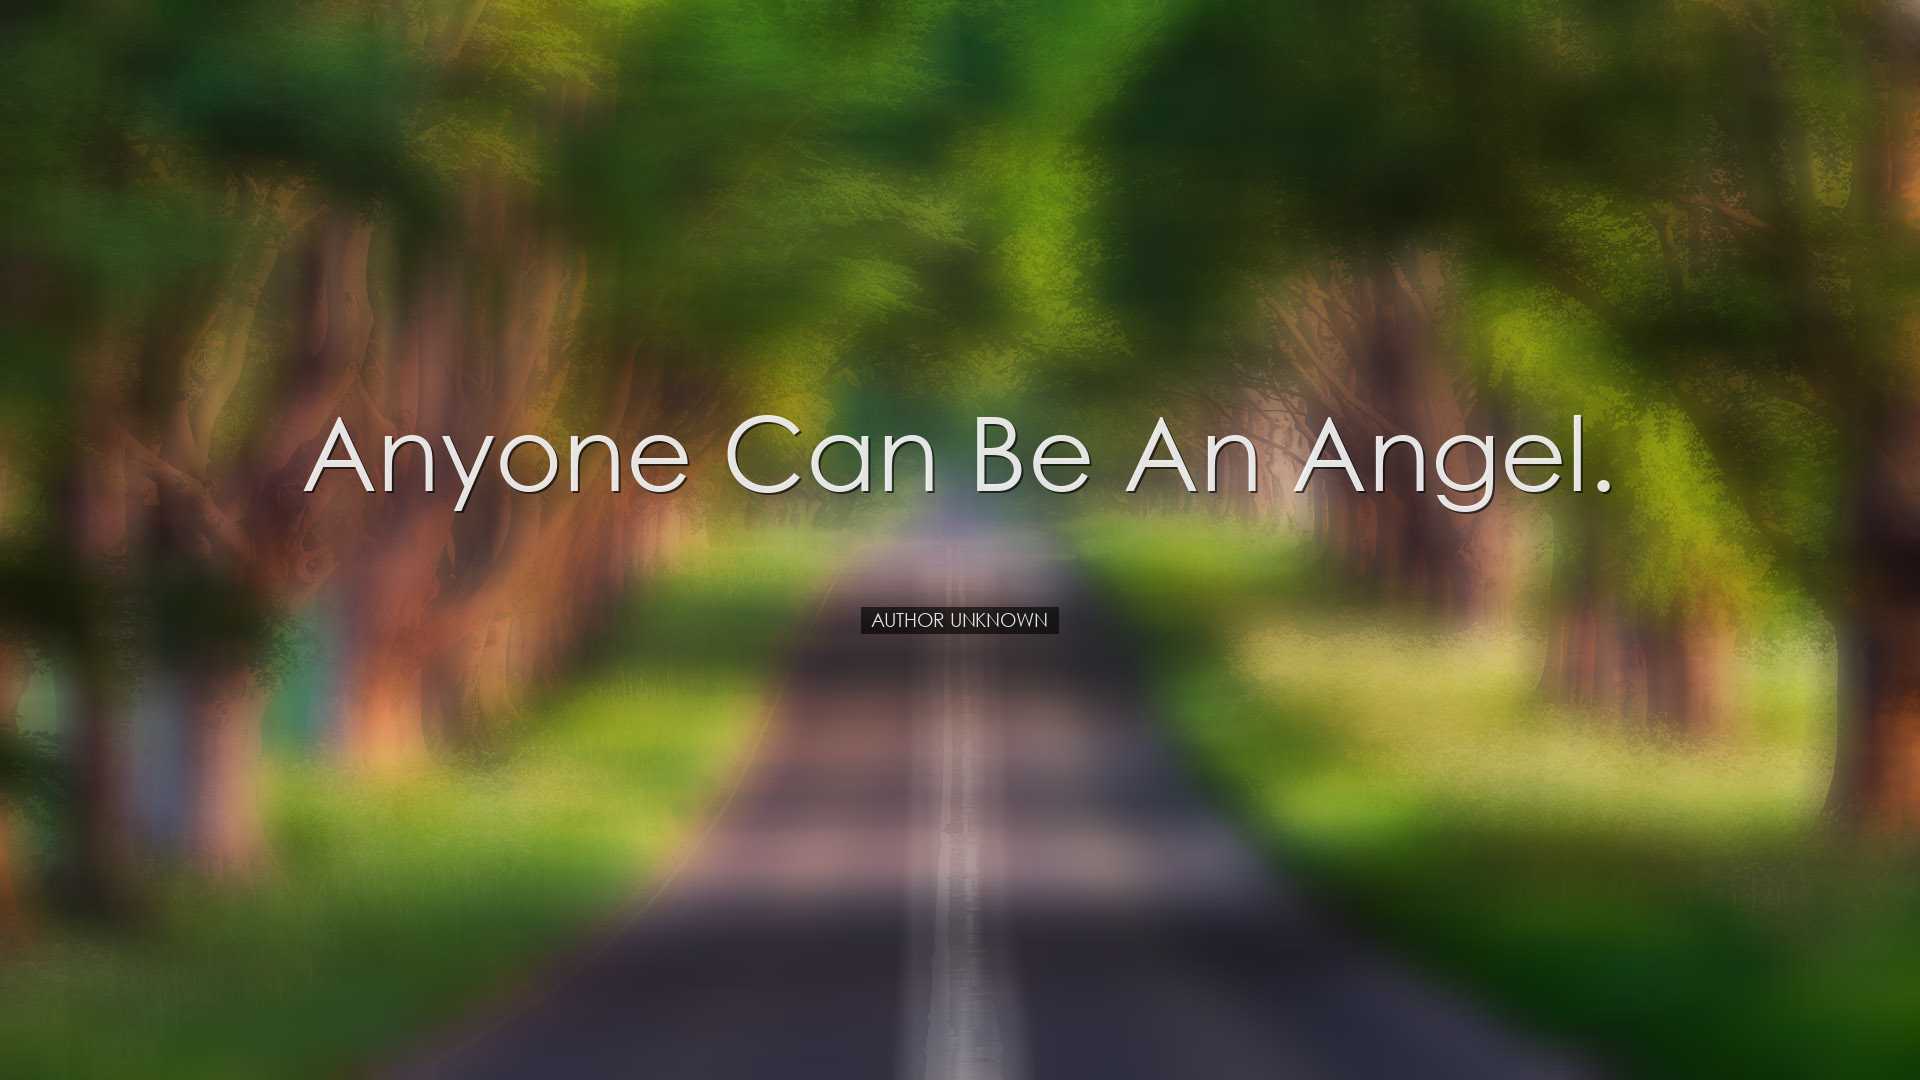 Anyone can be an angel. - Author Unknown